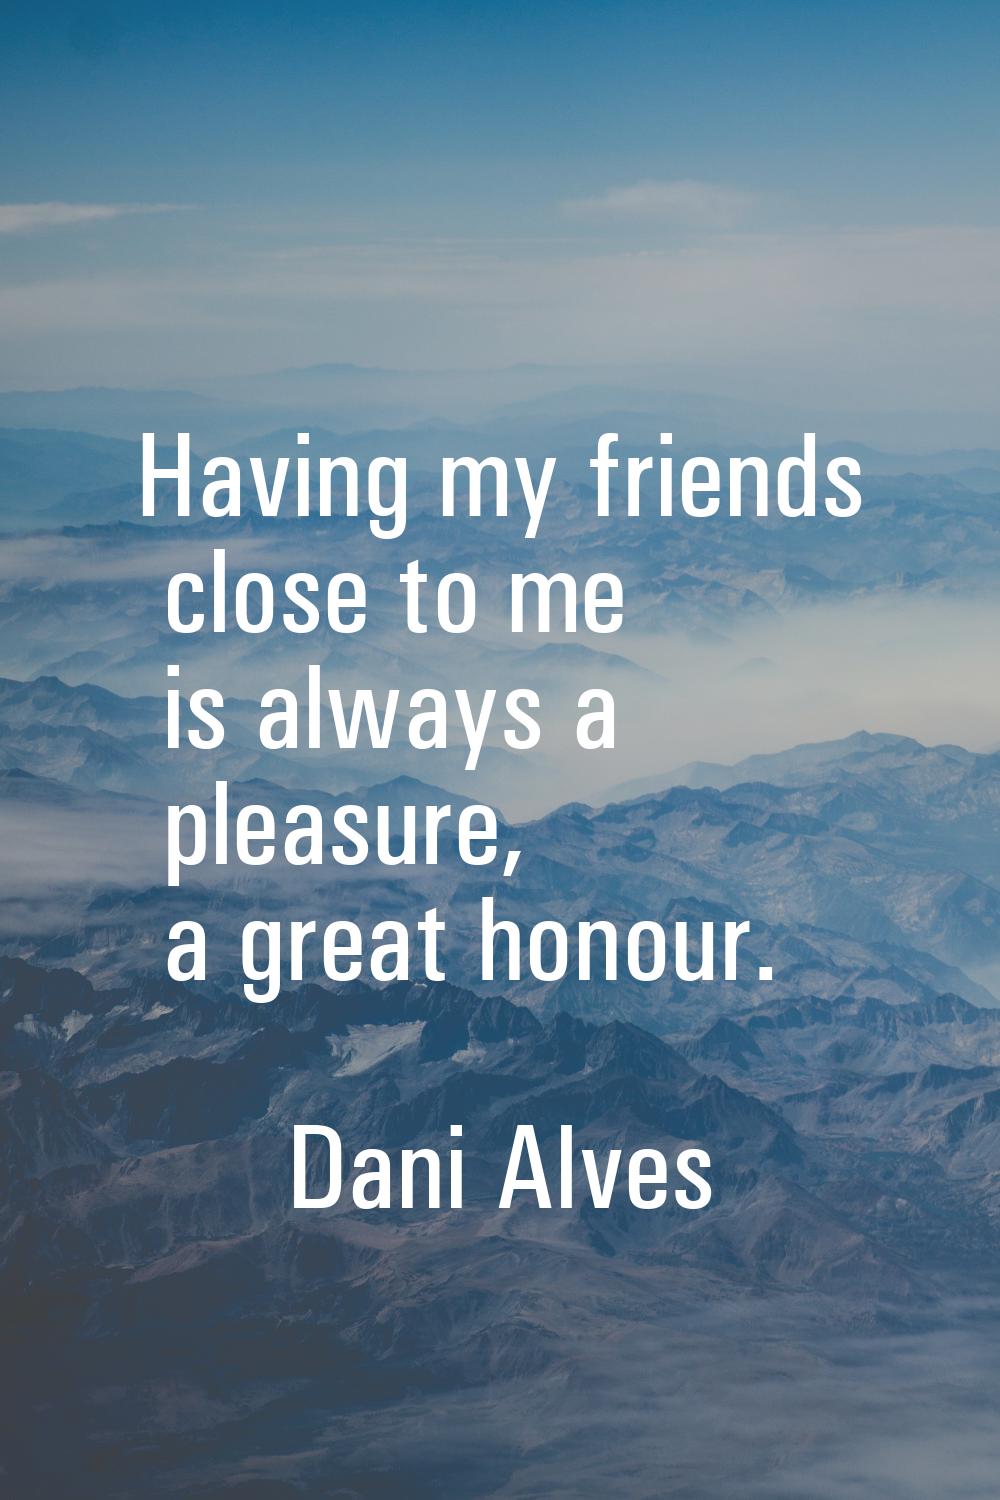 Having my friends close to me is always a pleasure, a great honour.